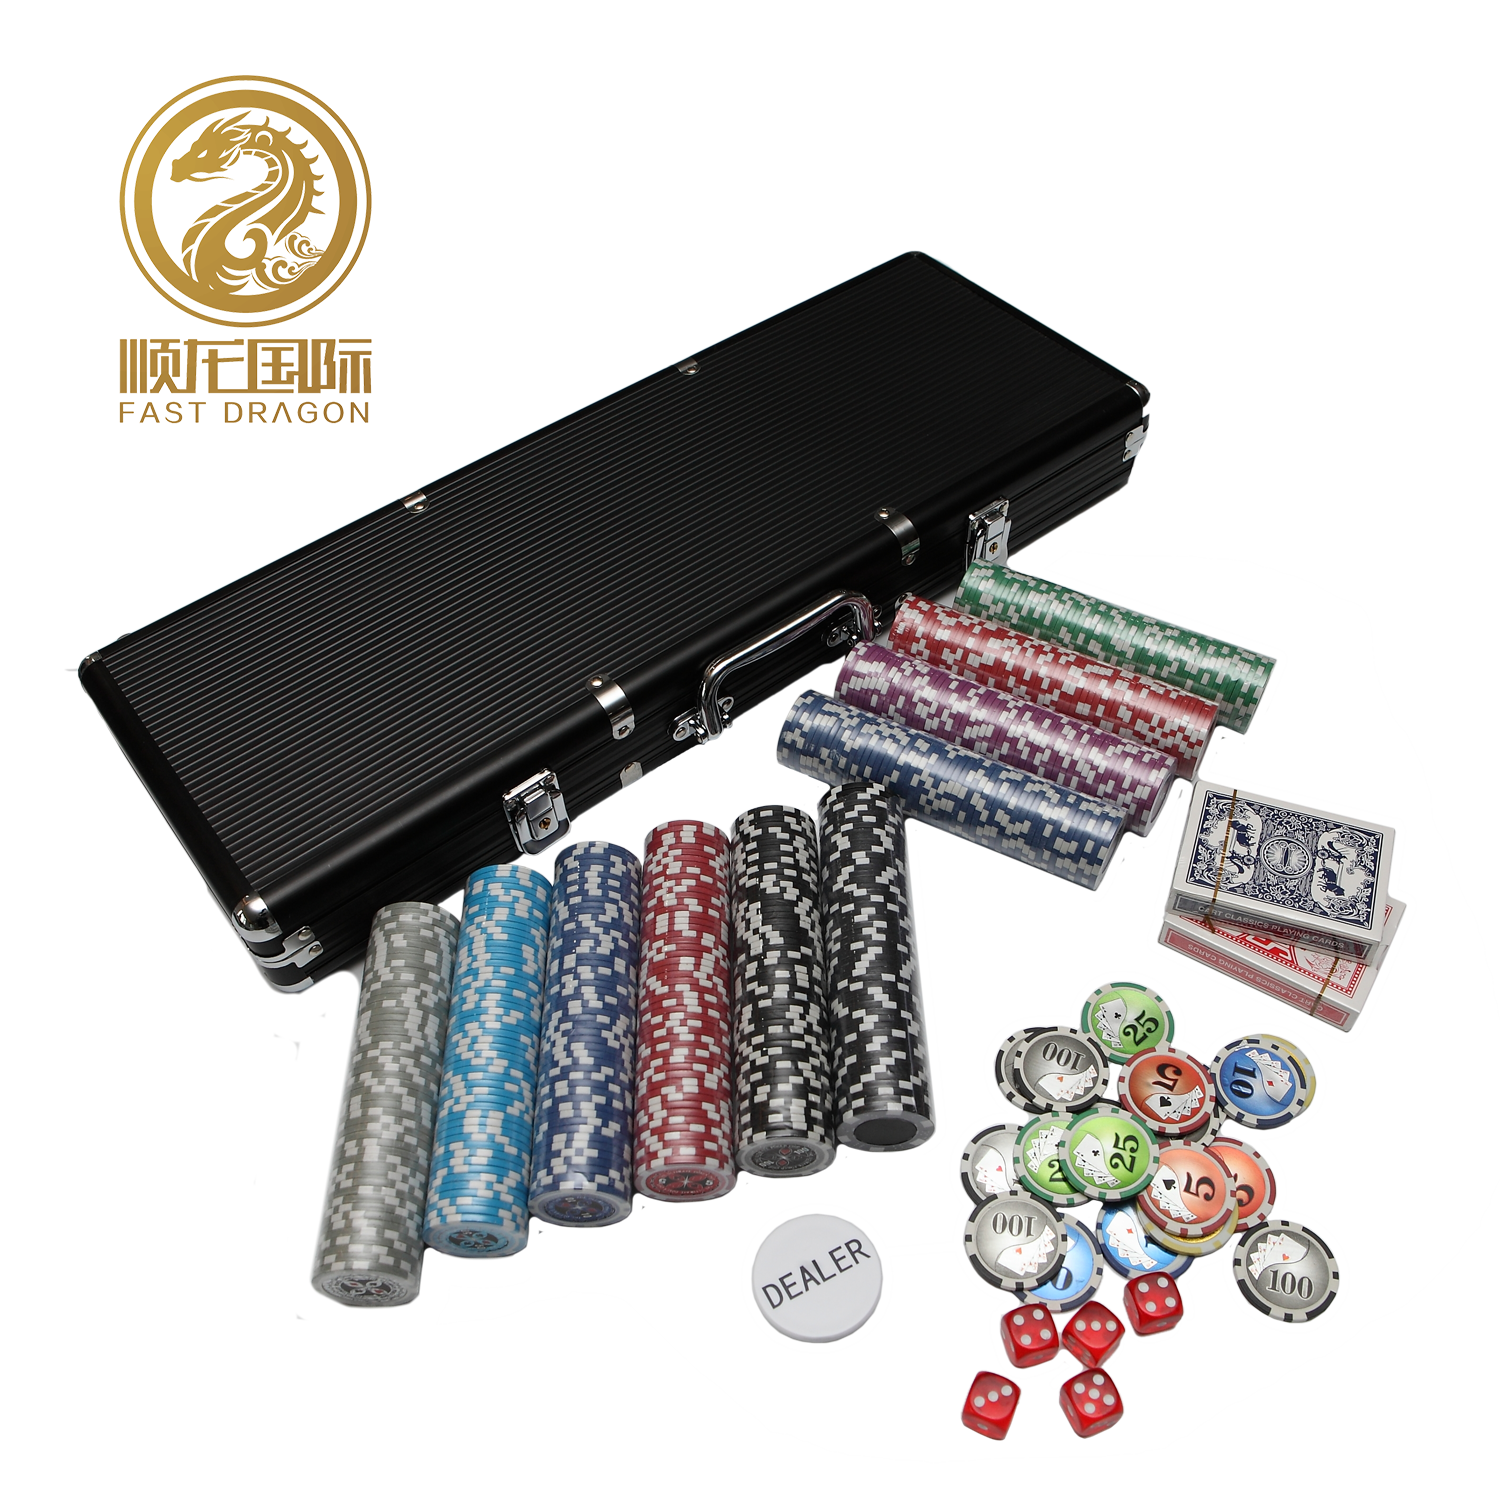 DRA-GB2012 11.5g ABS Casino Texas Poker Chips Sets with Metal Box Aluminum Case 